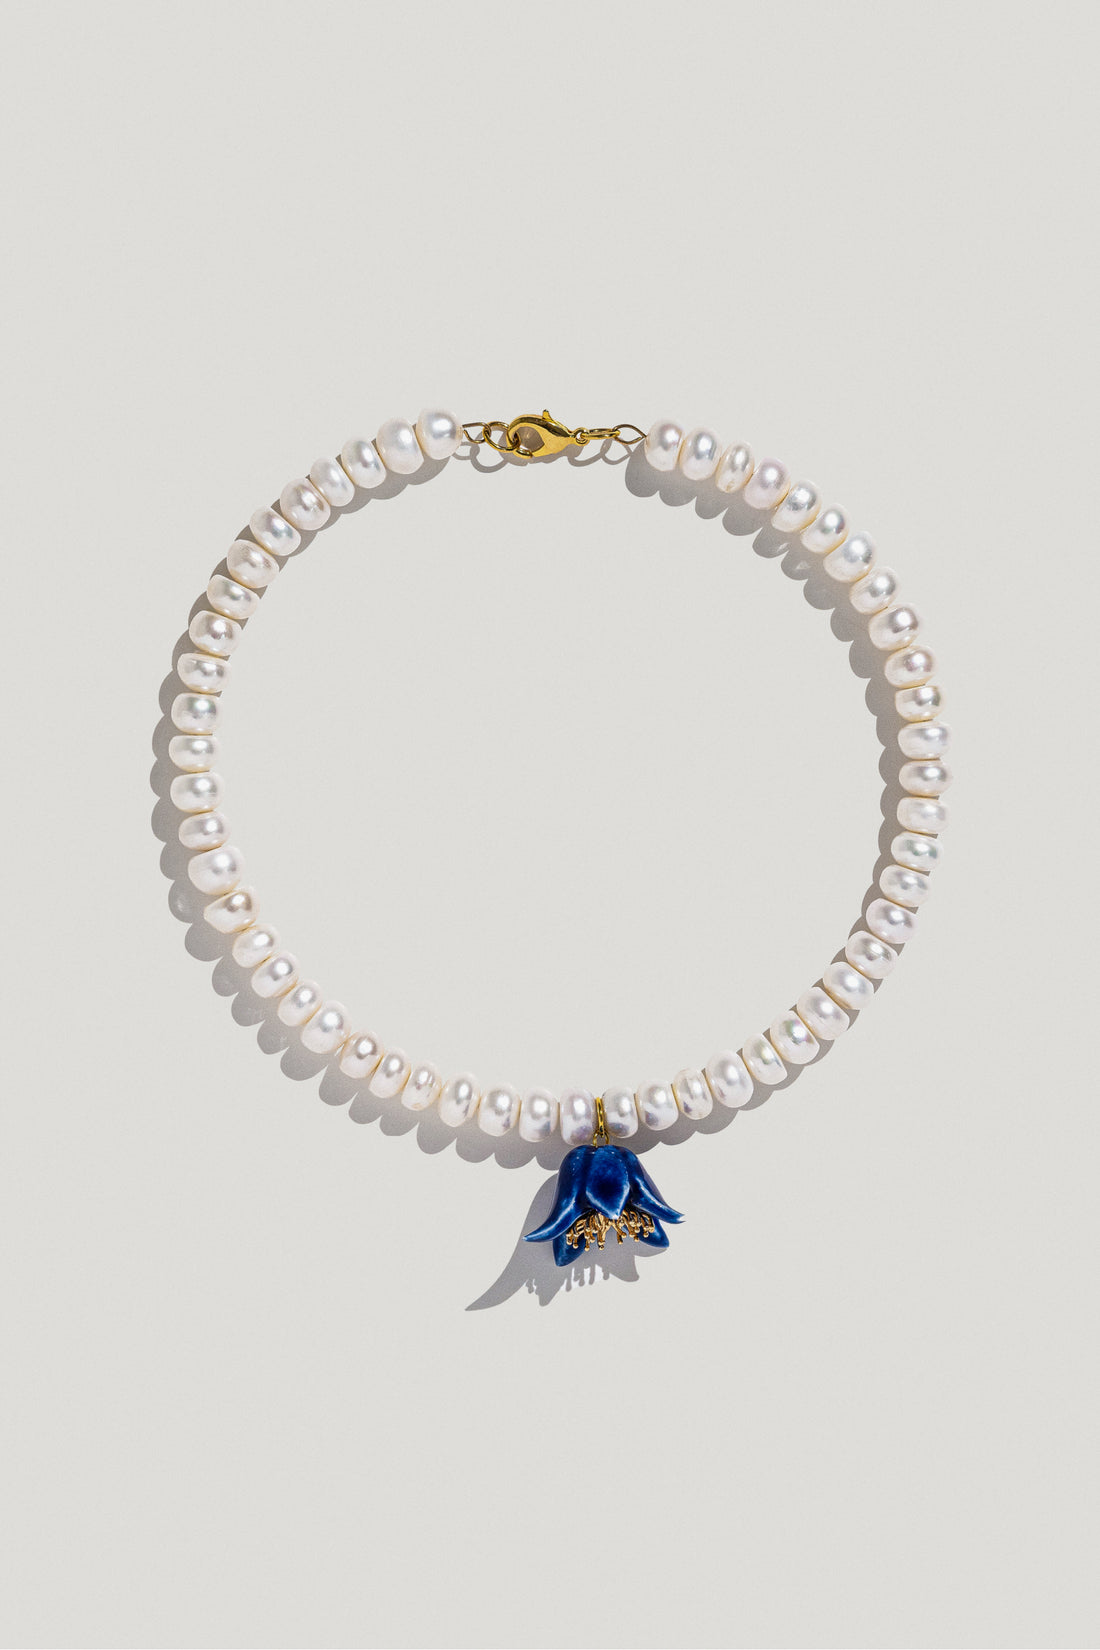 Polysk necklace with pearls and a blue porcelain flower